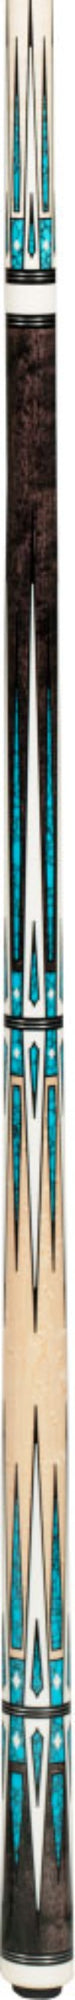 Pechauer PL-24 Limited Edition Pool Cue